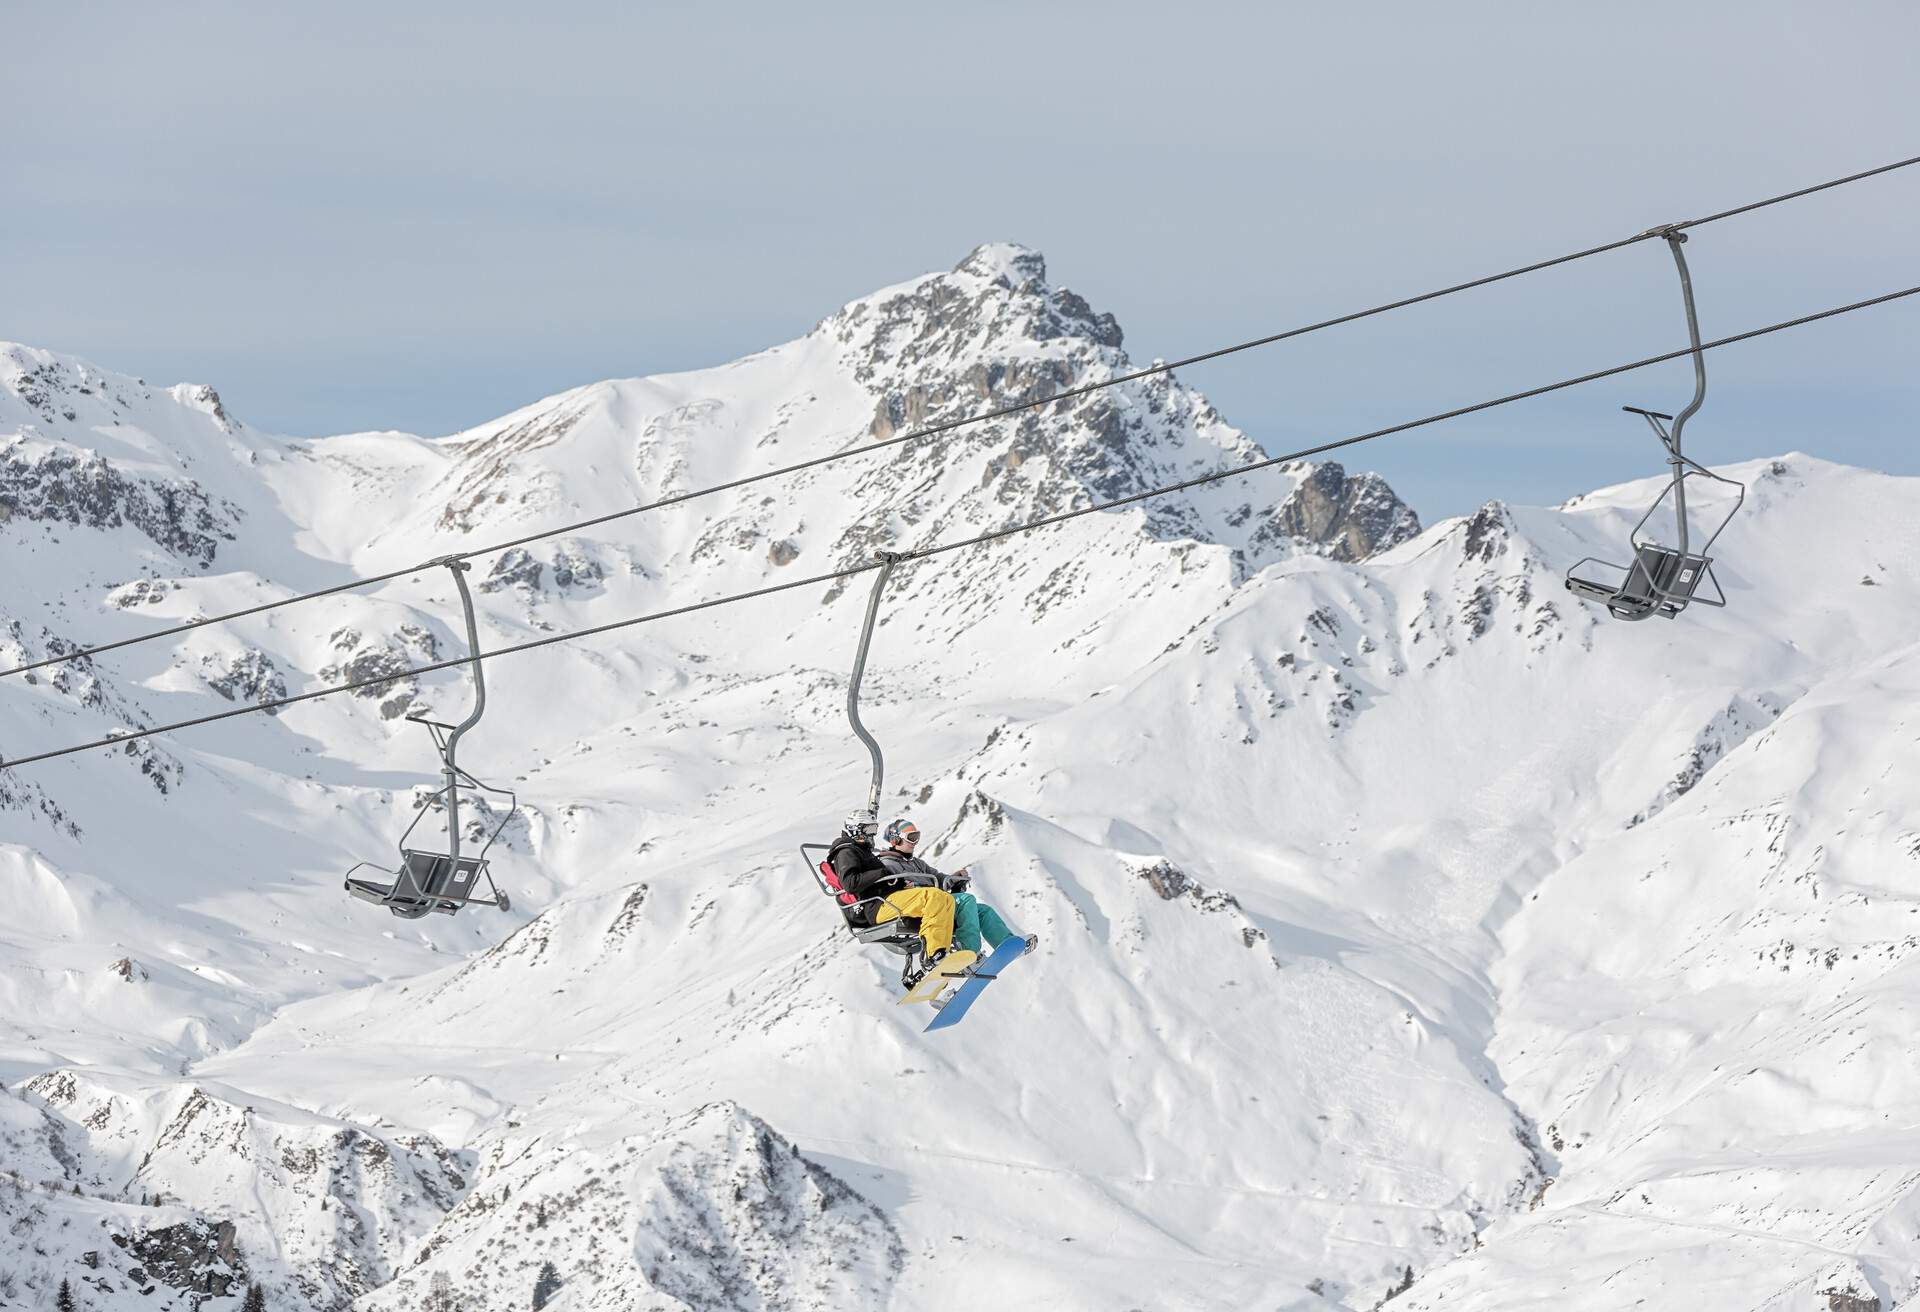 A pair travelling across the snow-covered mountains on a chairlift.